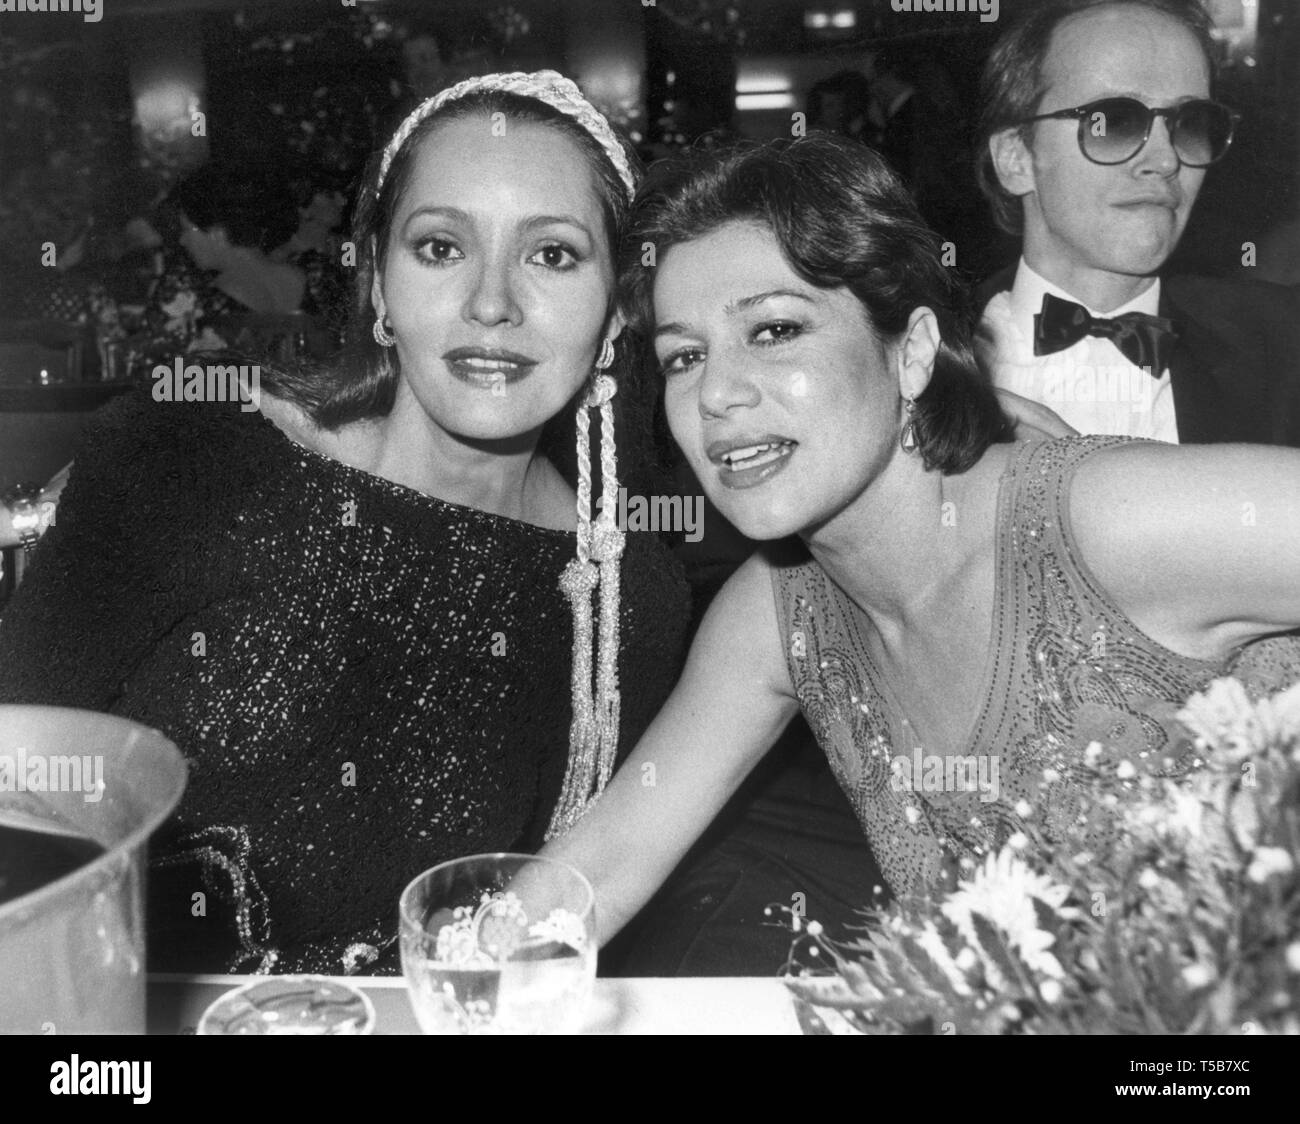 Film ball Black and White Stock Photos & Images - Alamy